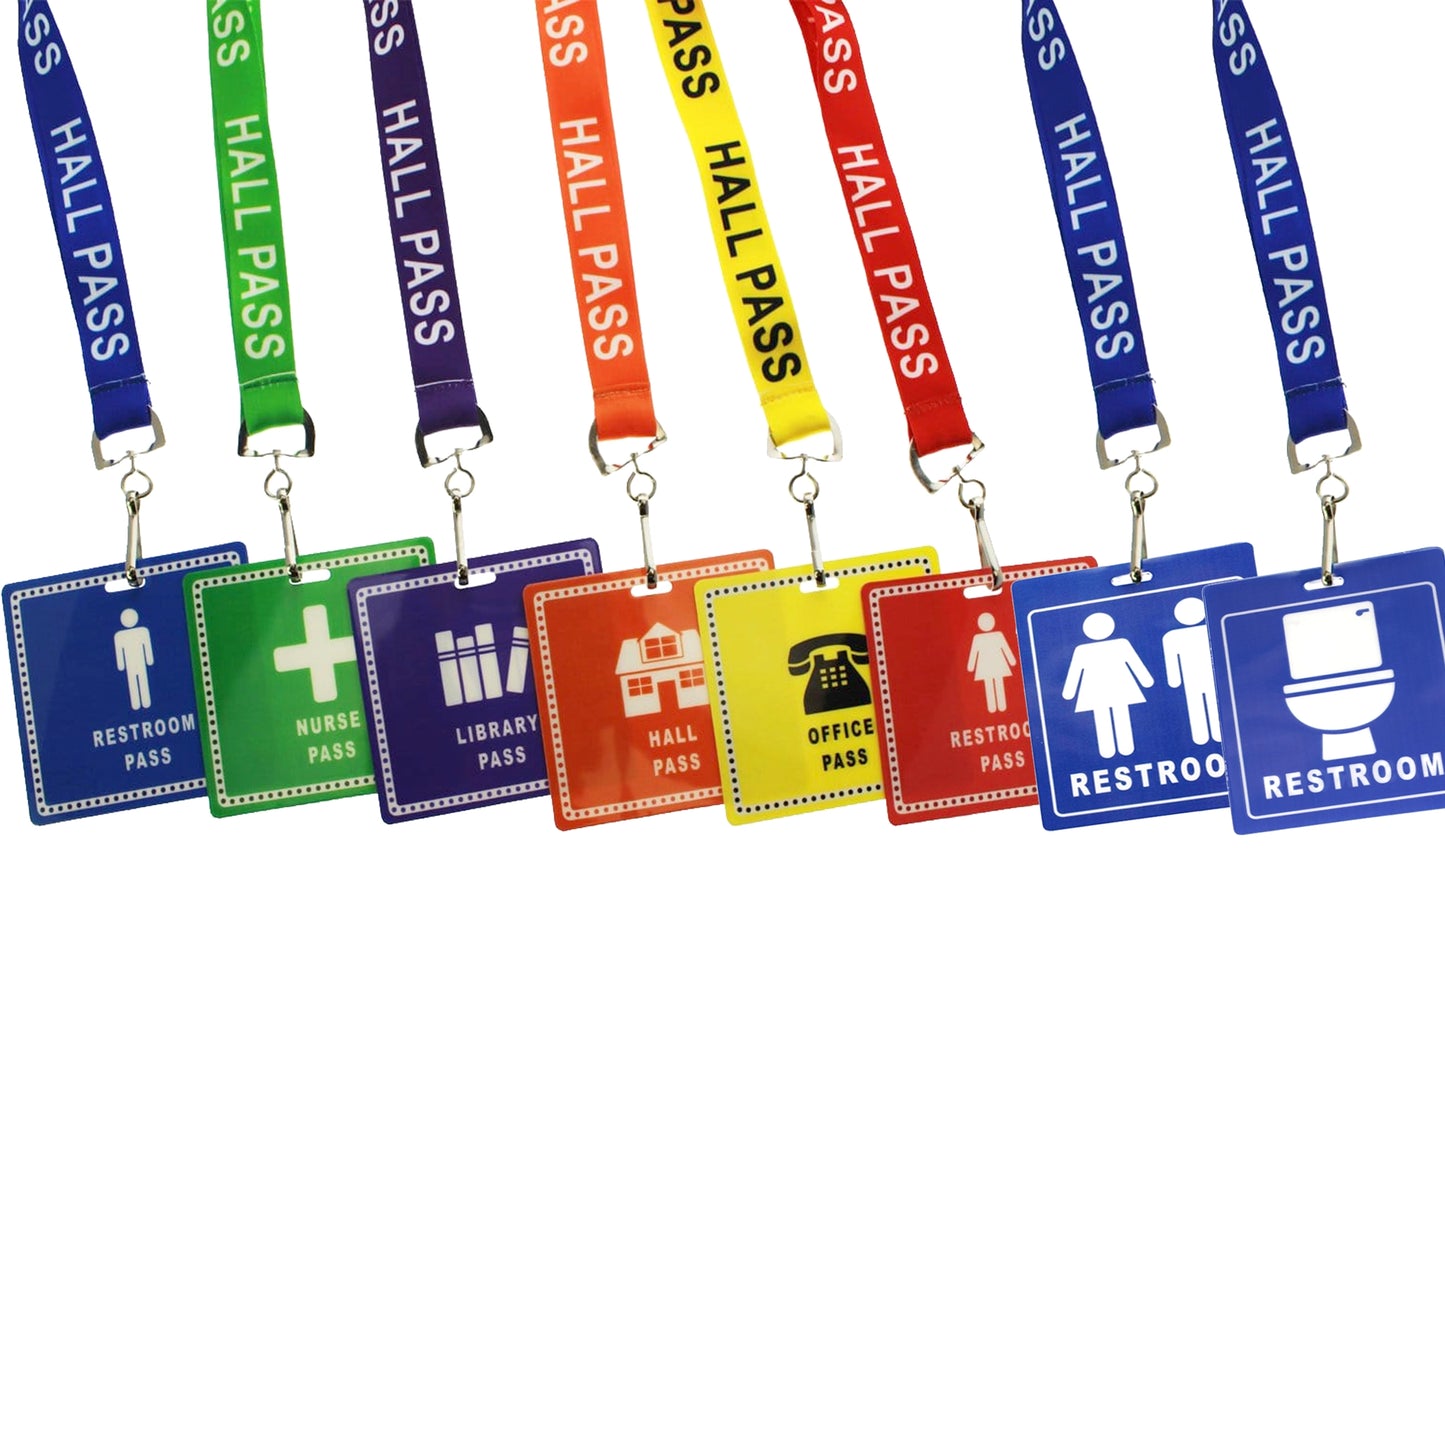 A set of School Hall Pass Lanyards WITH UNBREAKABLE CARD PASSES (SPID-9800), featuring colored lanyards with safety breakaway attachments and waterproof laminated passes labeled for various purposes such as restroom, nurse, library, hall, office, and restroom.